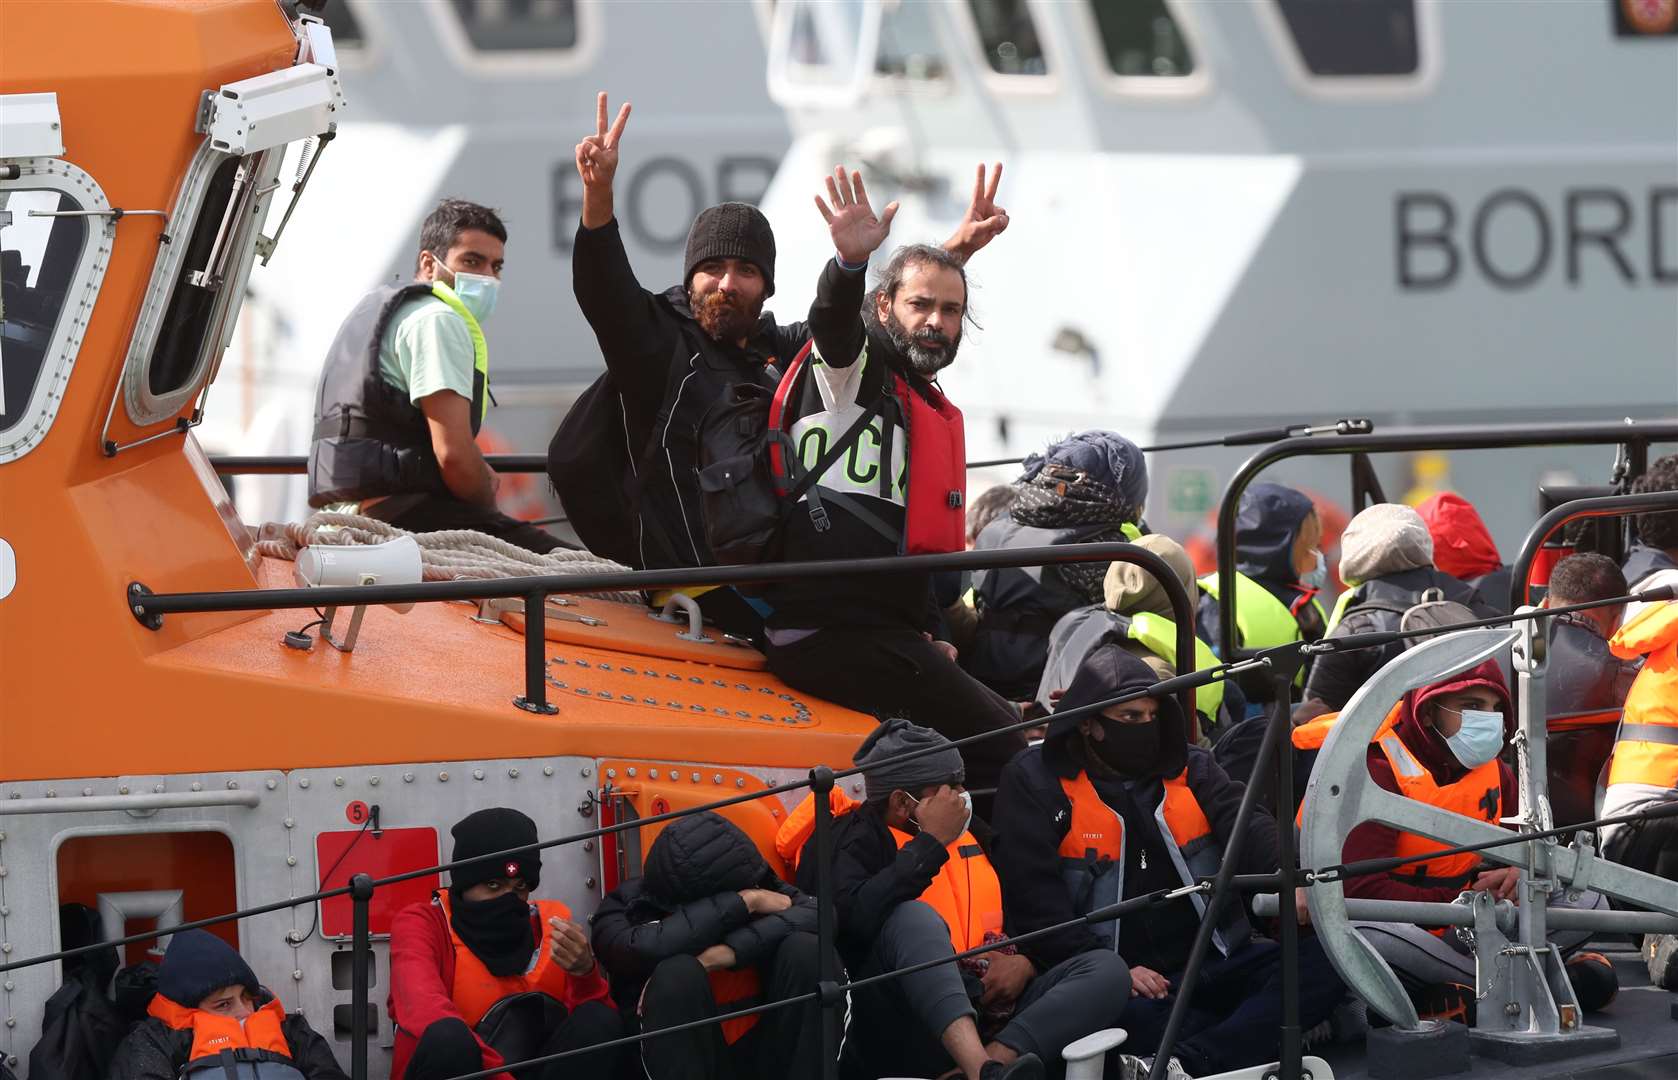 A group of people thought to be migrants are brought in to Dover, Kent (Andrew Matthews/PA)